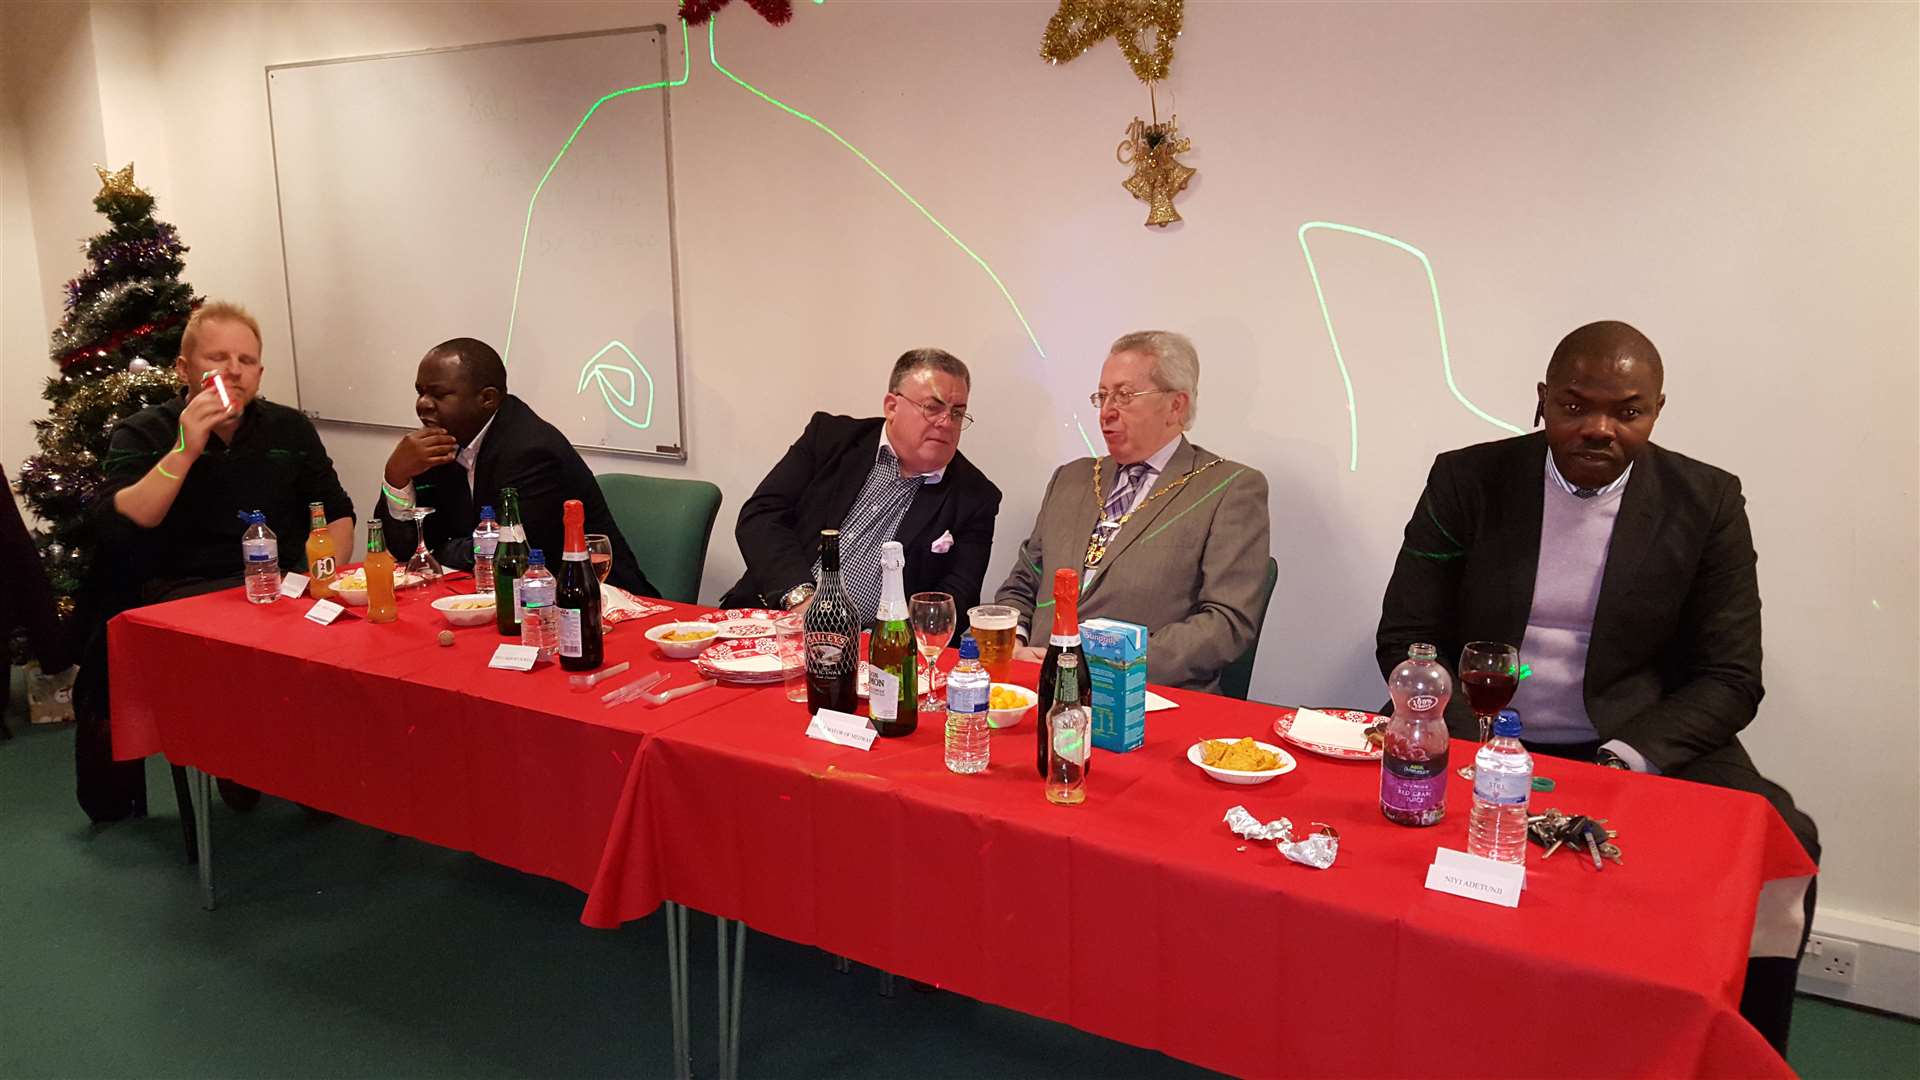 Deputy mayor Cllr Steven Illes (second from right) enjoying the Fairways Trust End of Year Party and Awards Evening